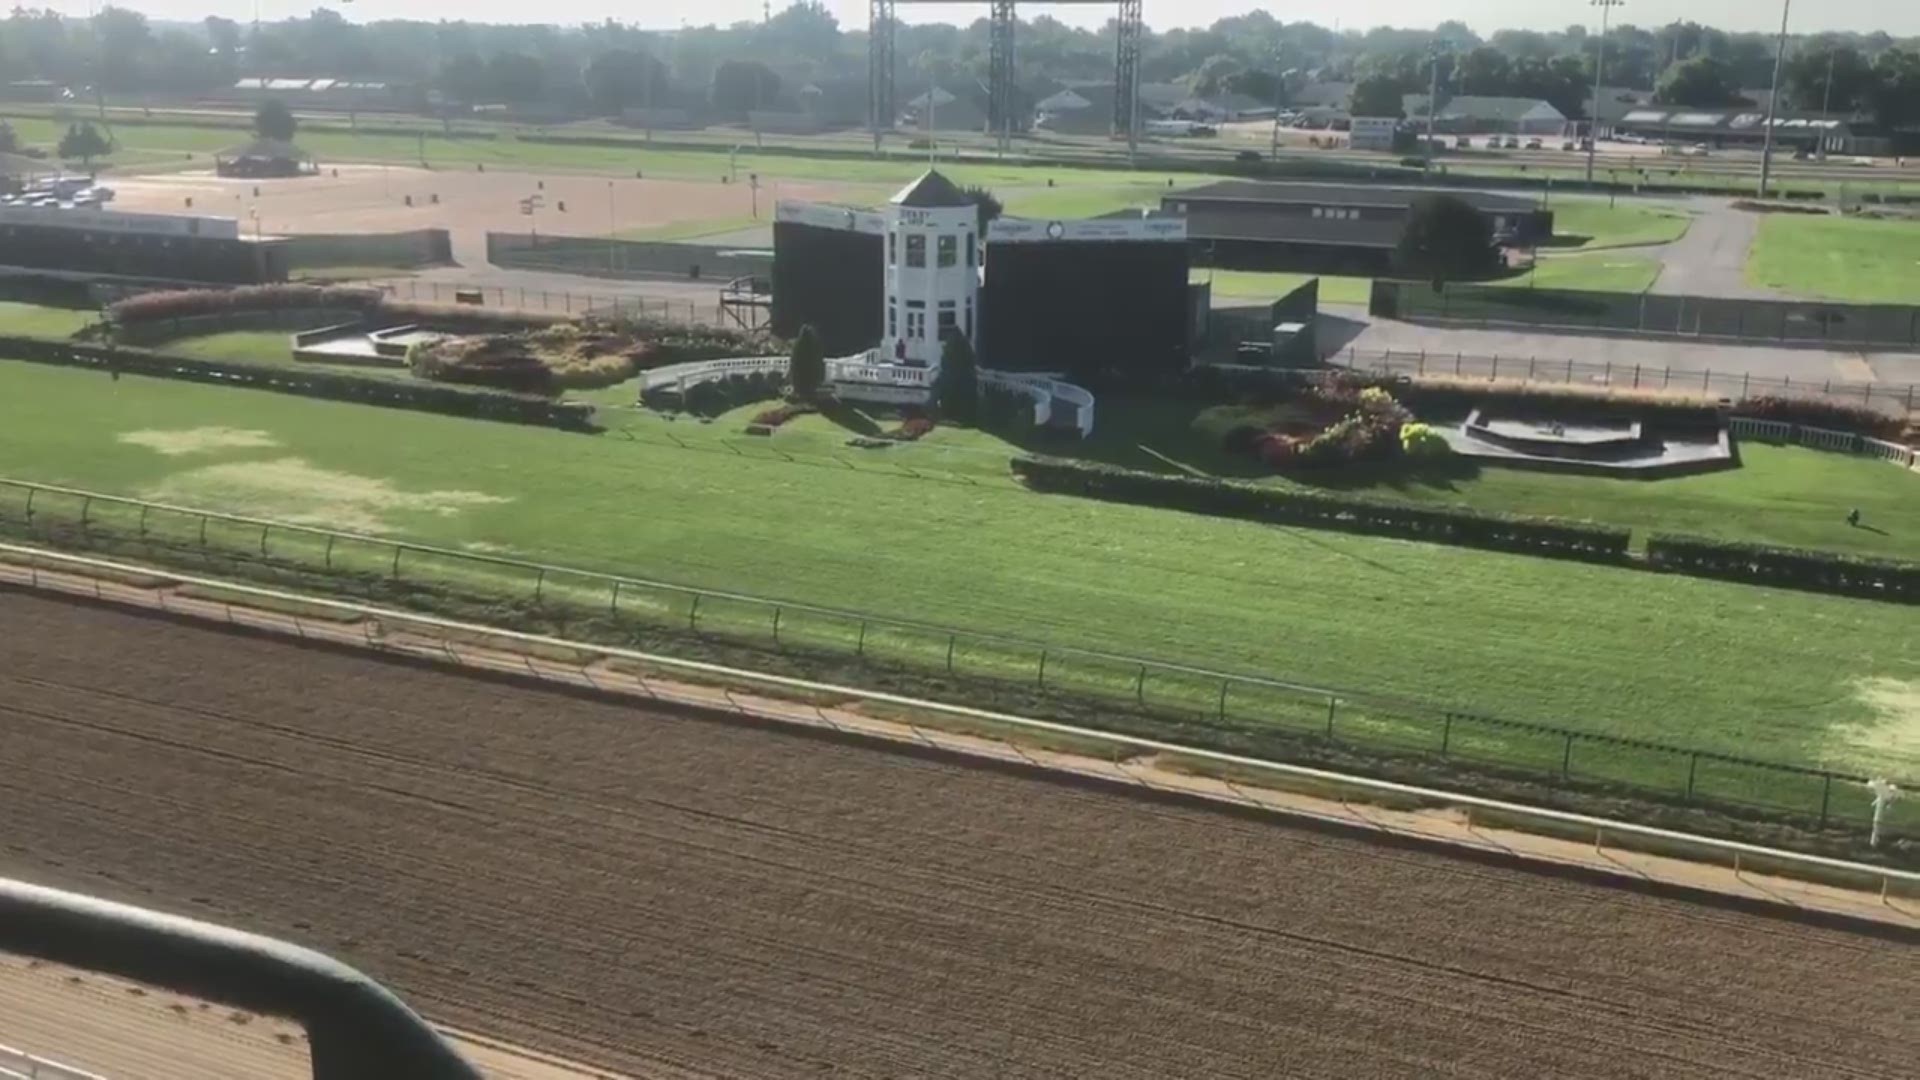 Churchill Downs gives John Asher one more lap around the track before visitation